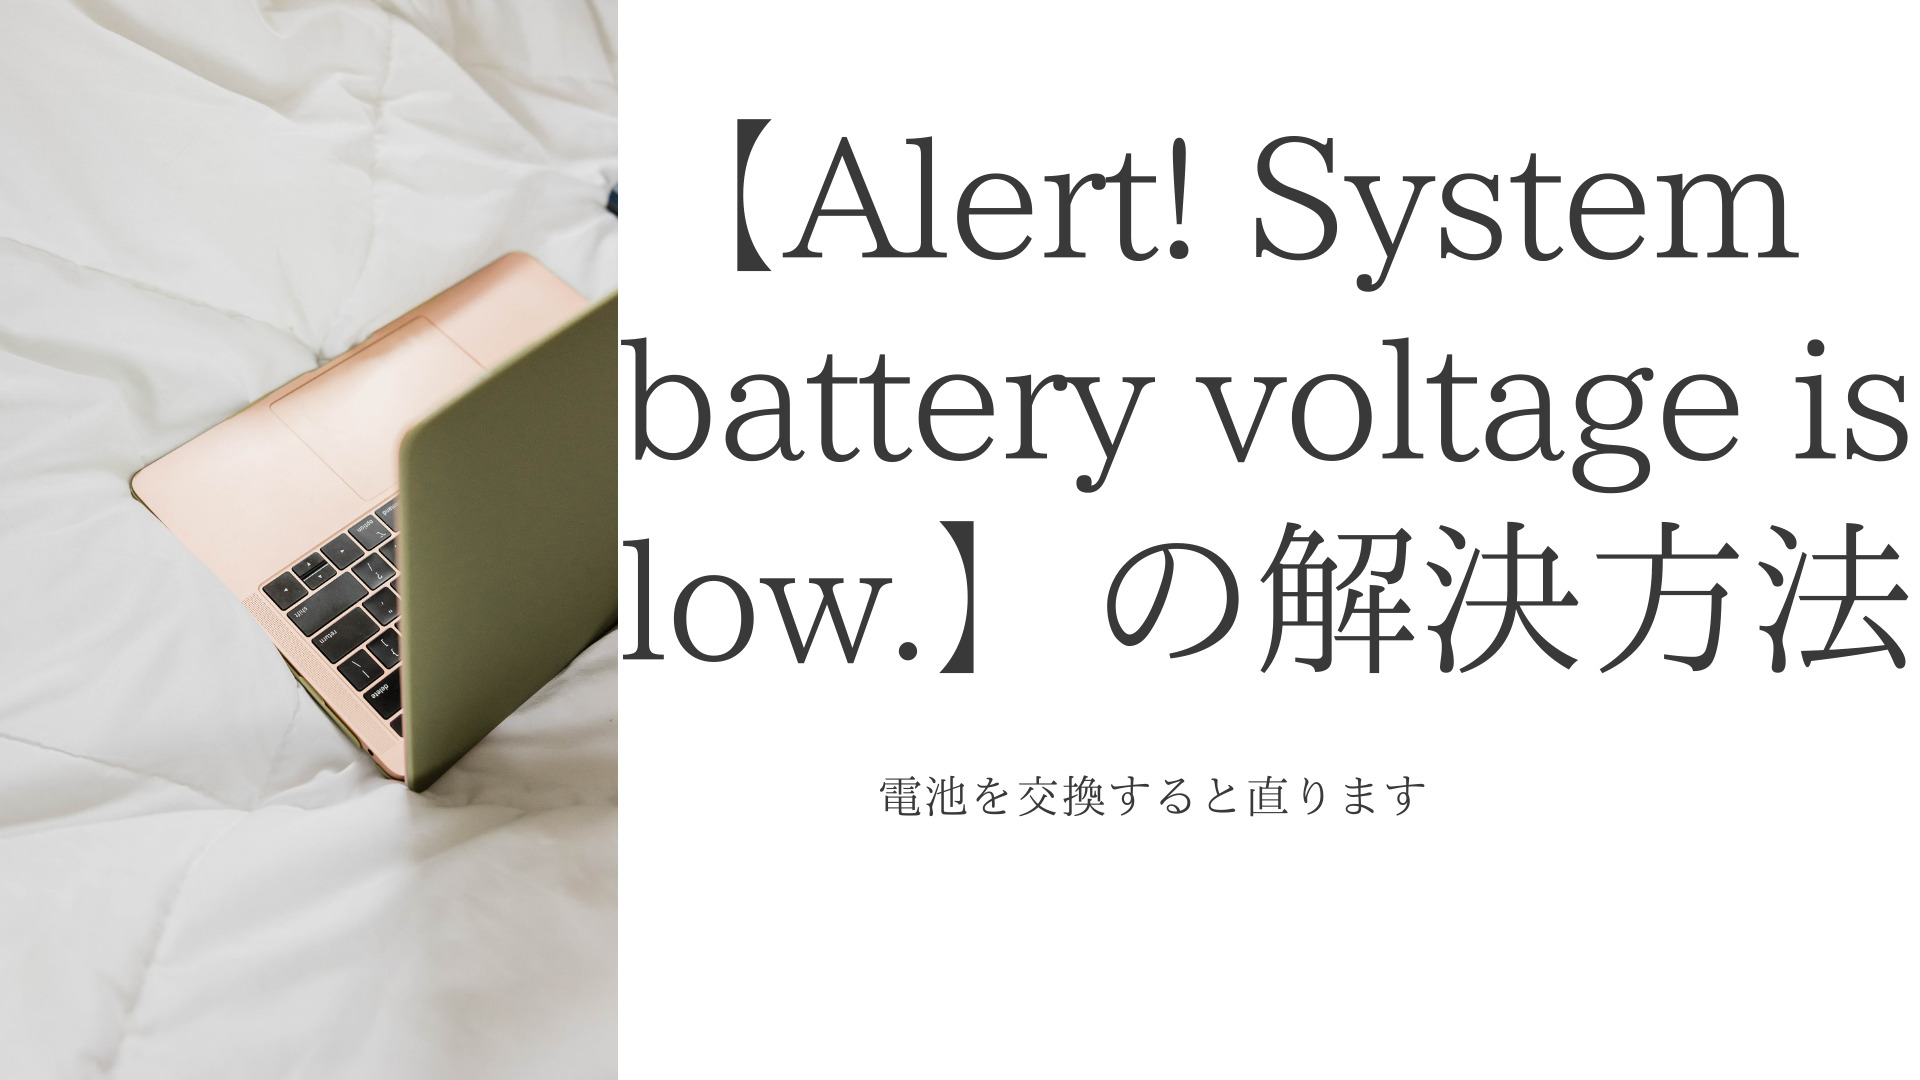 【Alert! System battery voltage is low.】の解決方法